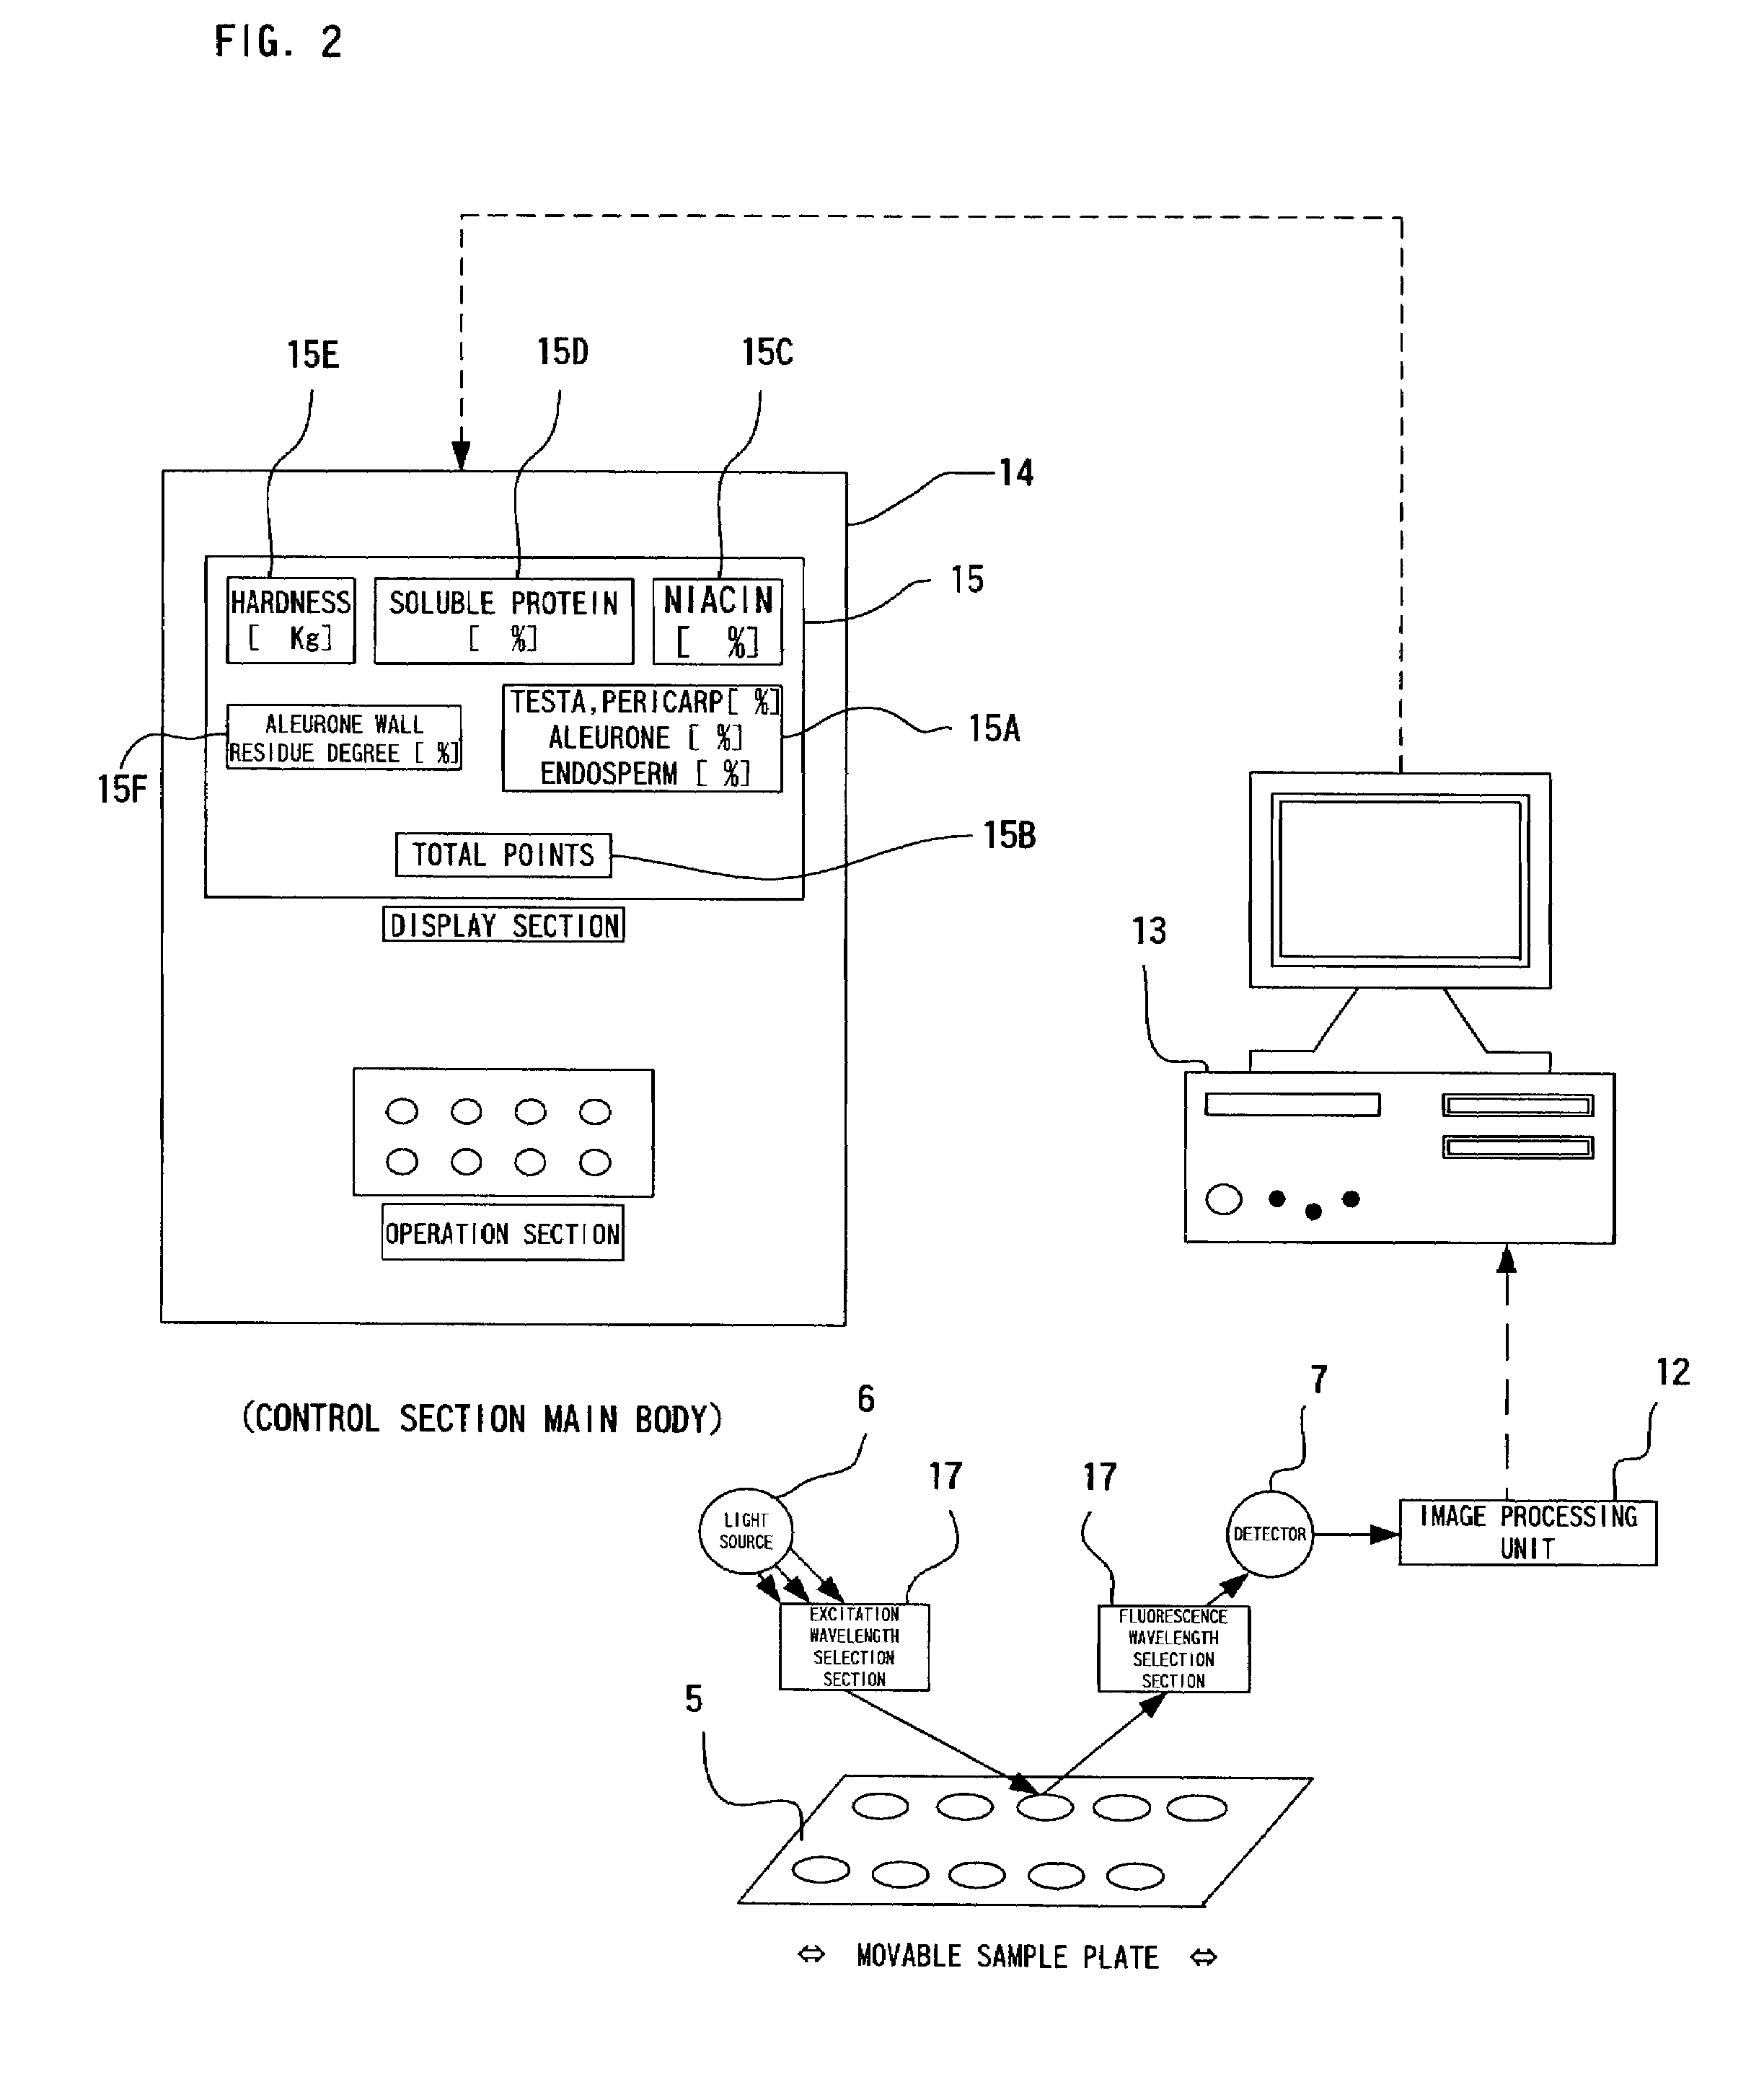 Quality evaluation method and apparatus for non-bran rice